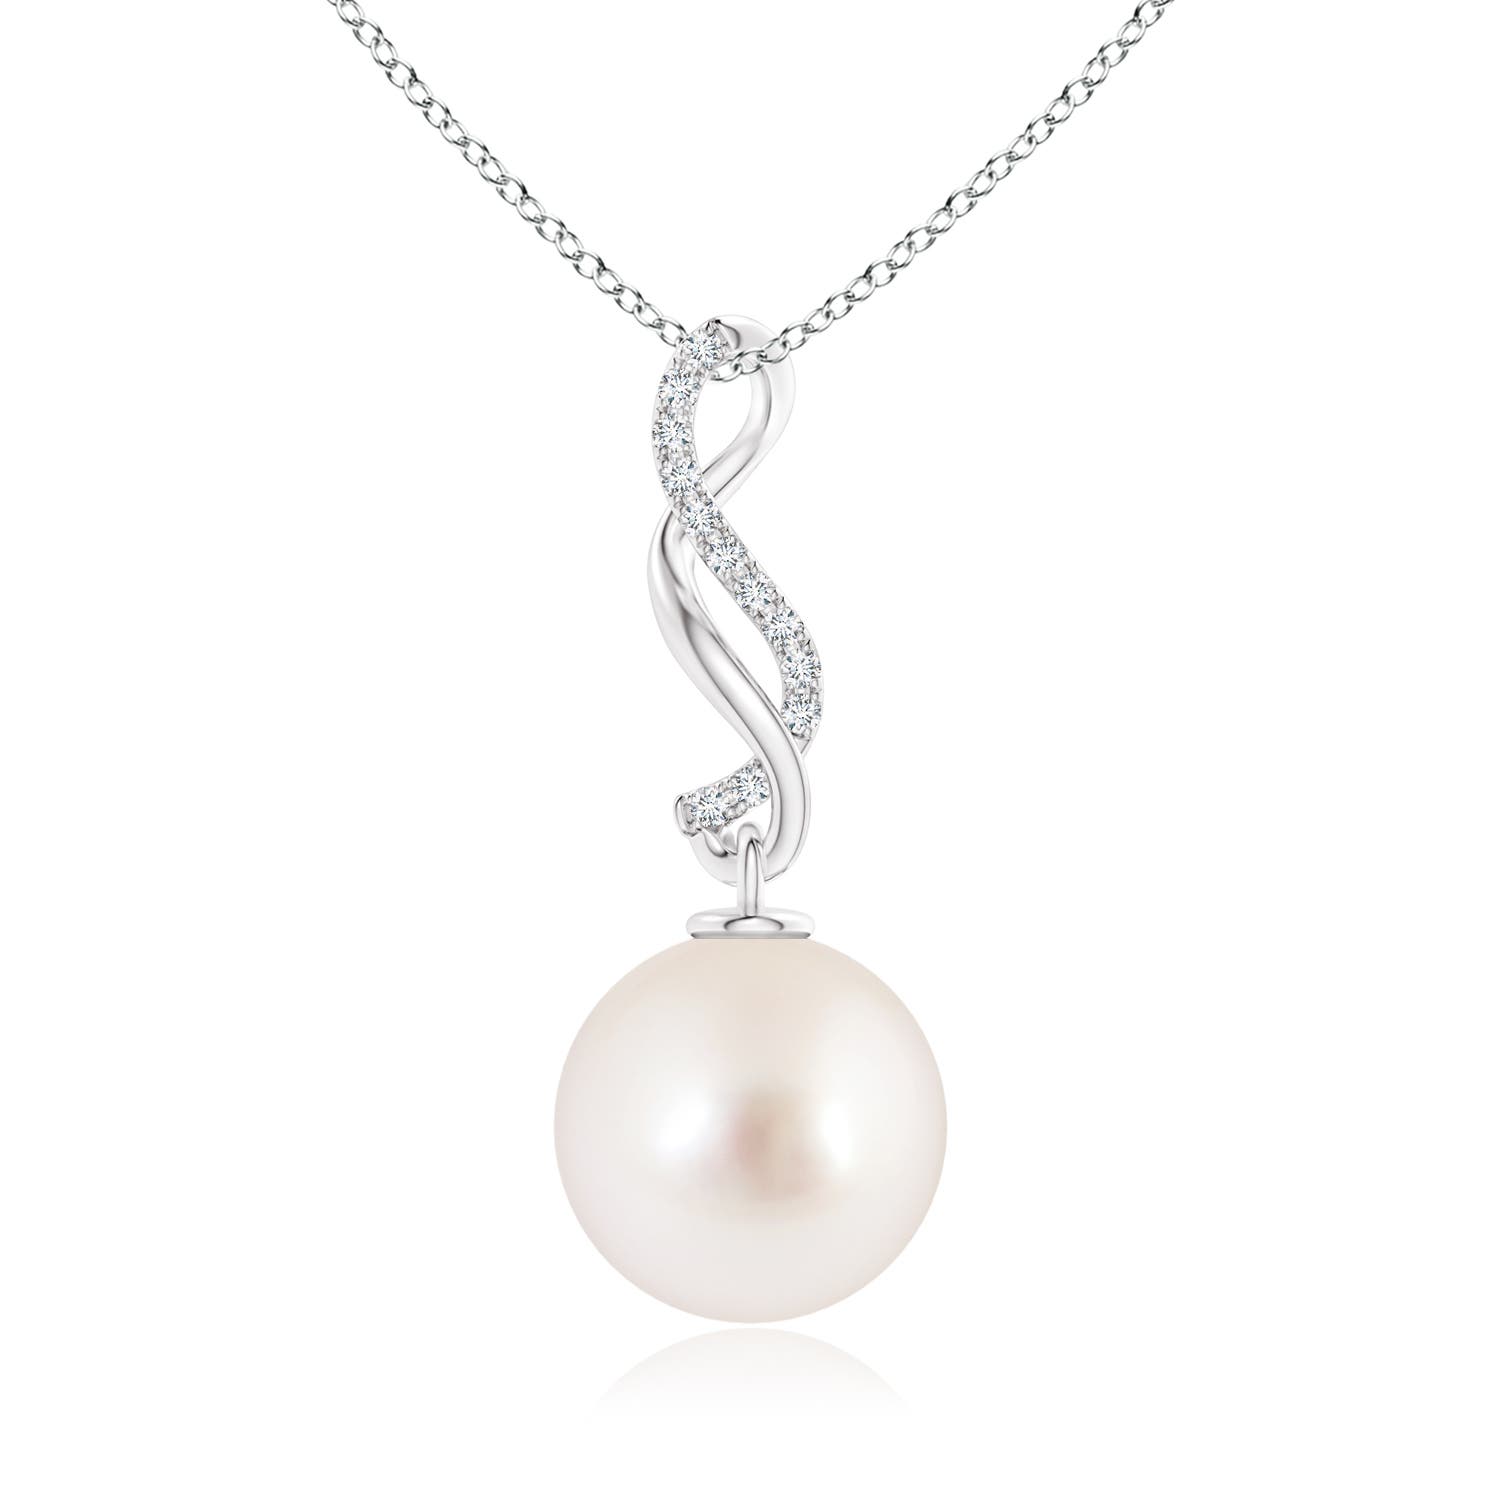 AAAA - South Sea Cultured Pearl / 7.26 CT / 14 KT White Gold